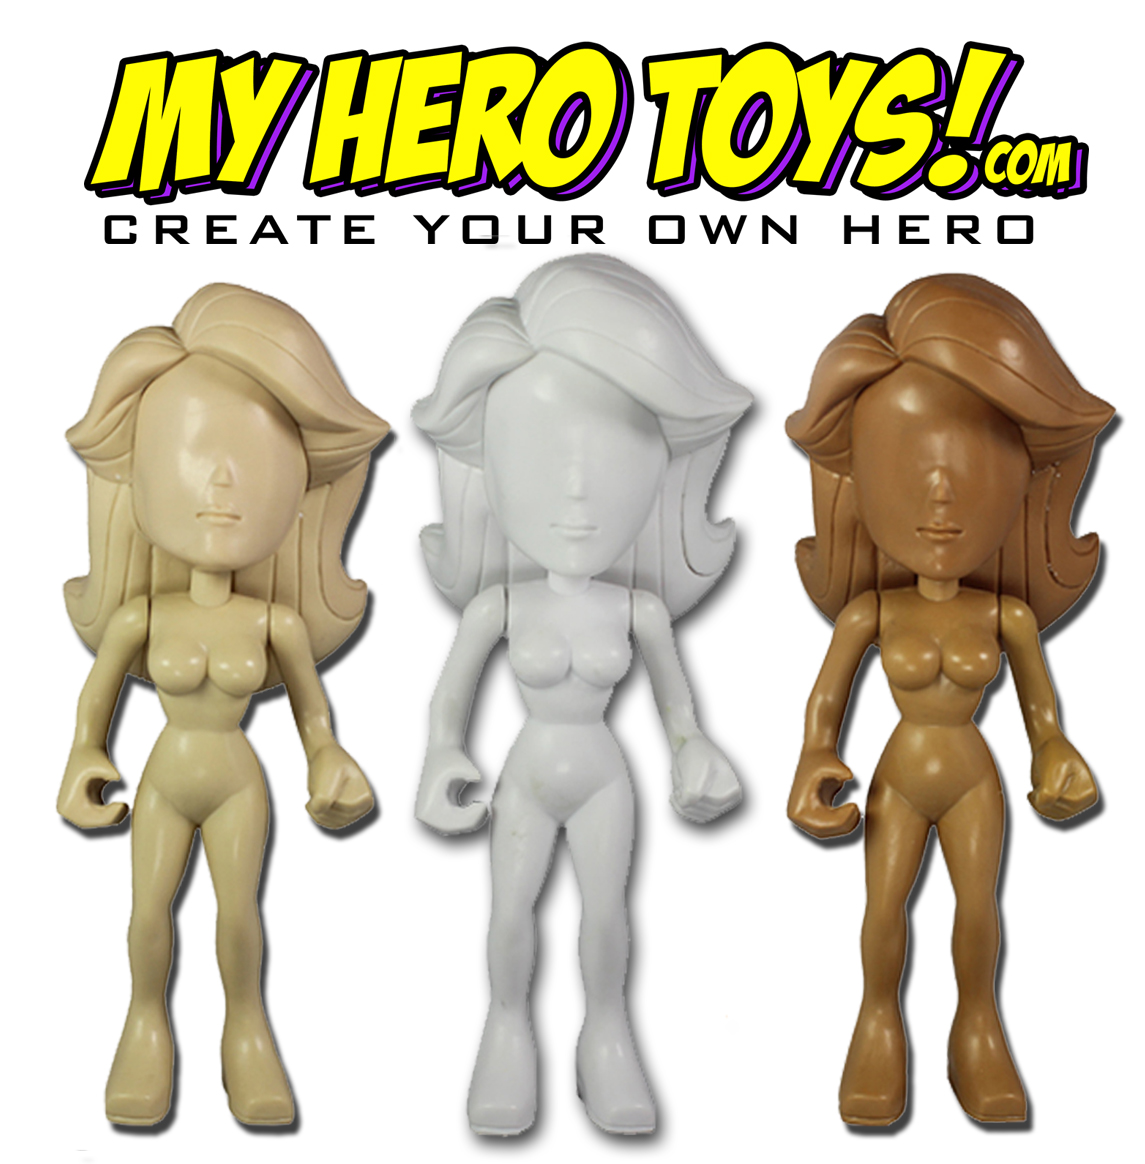 My hero Toys by Tanya Tate